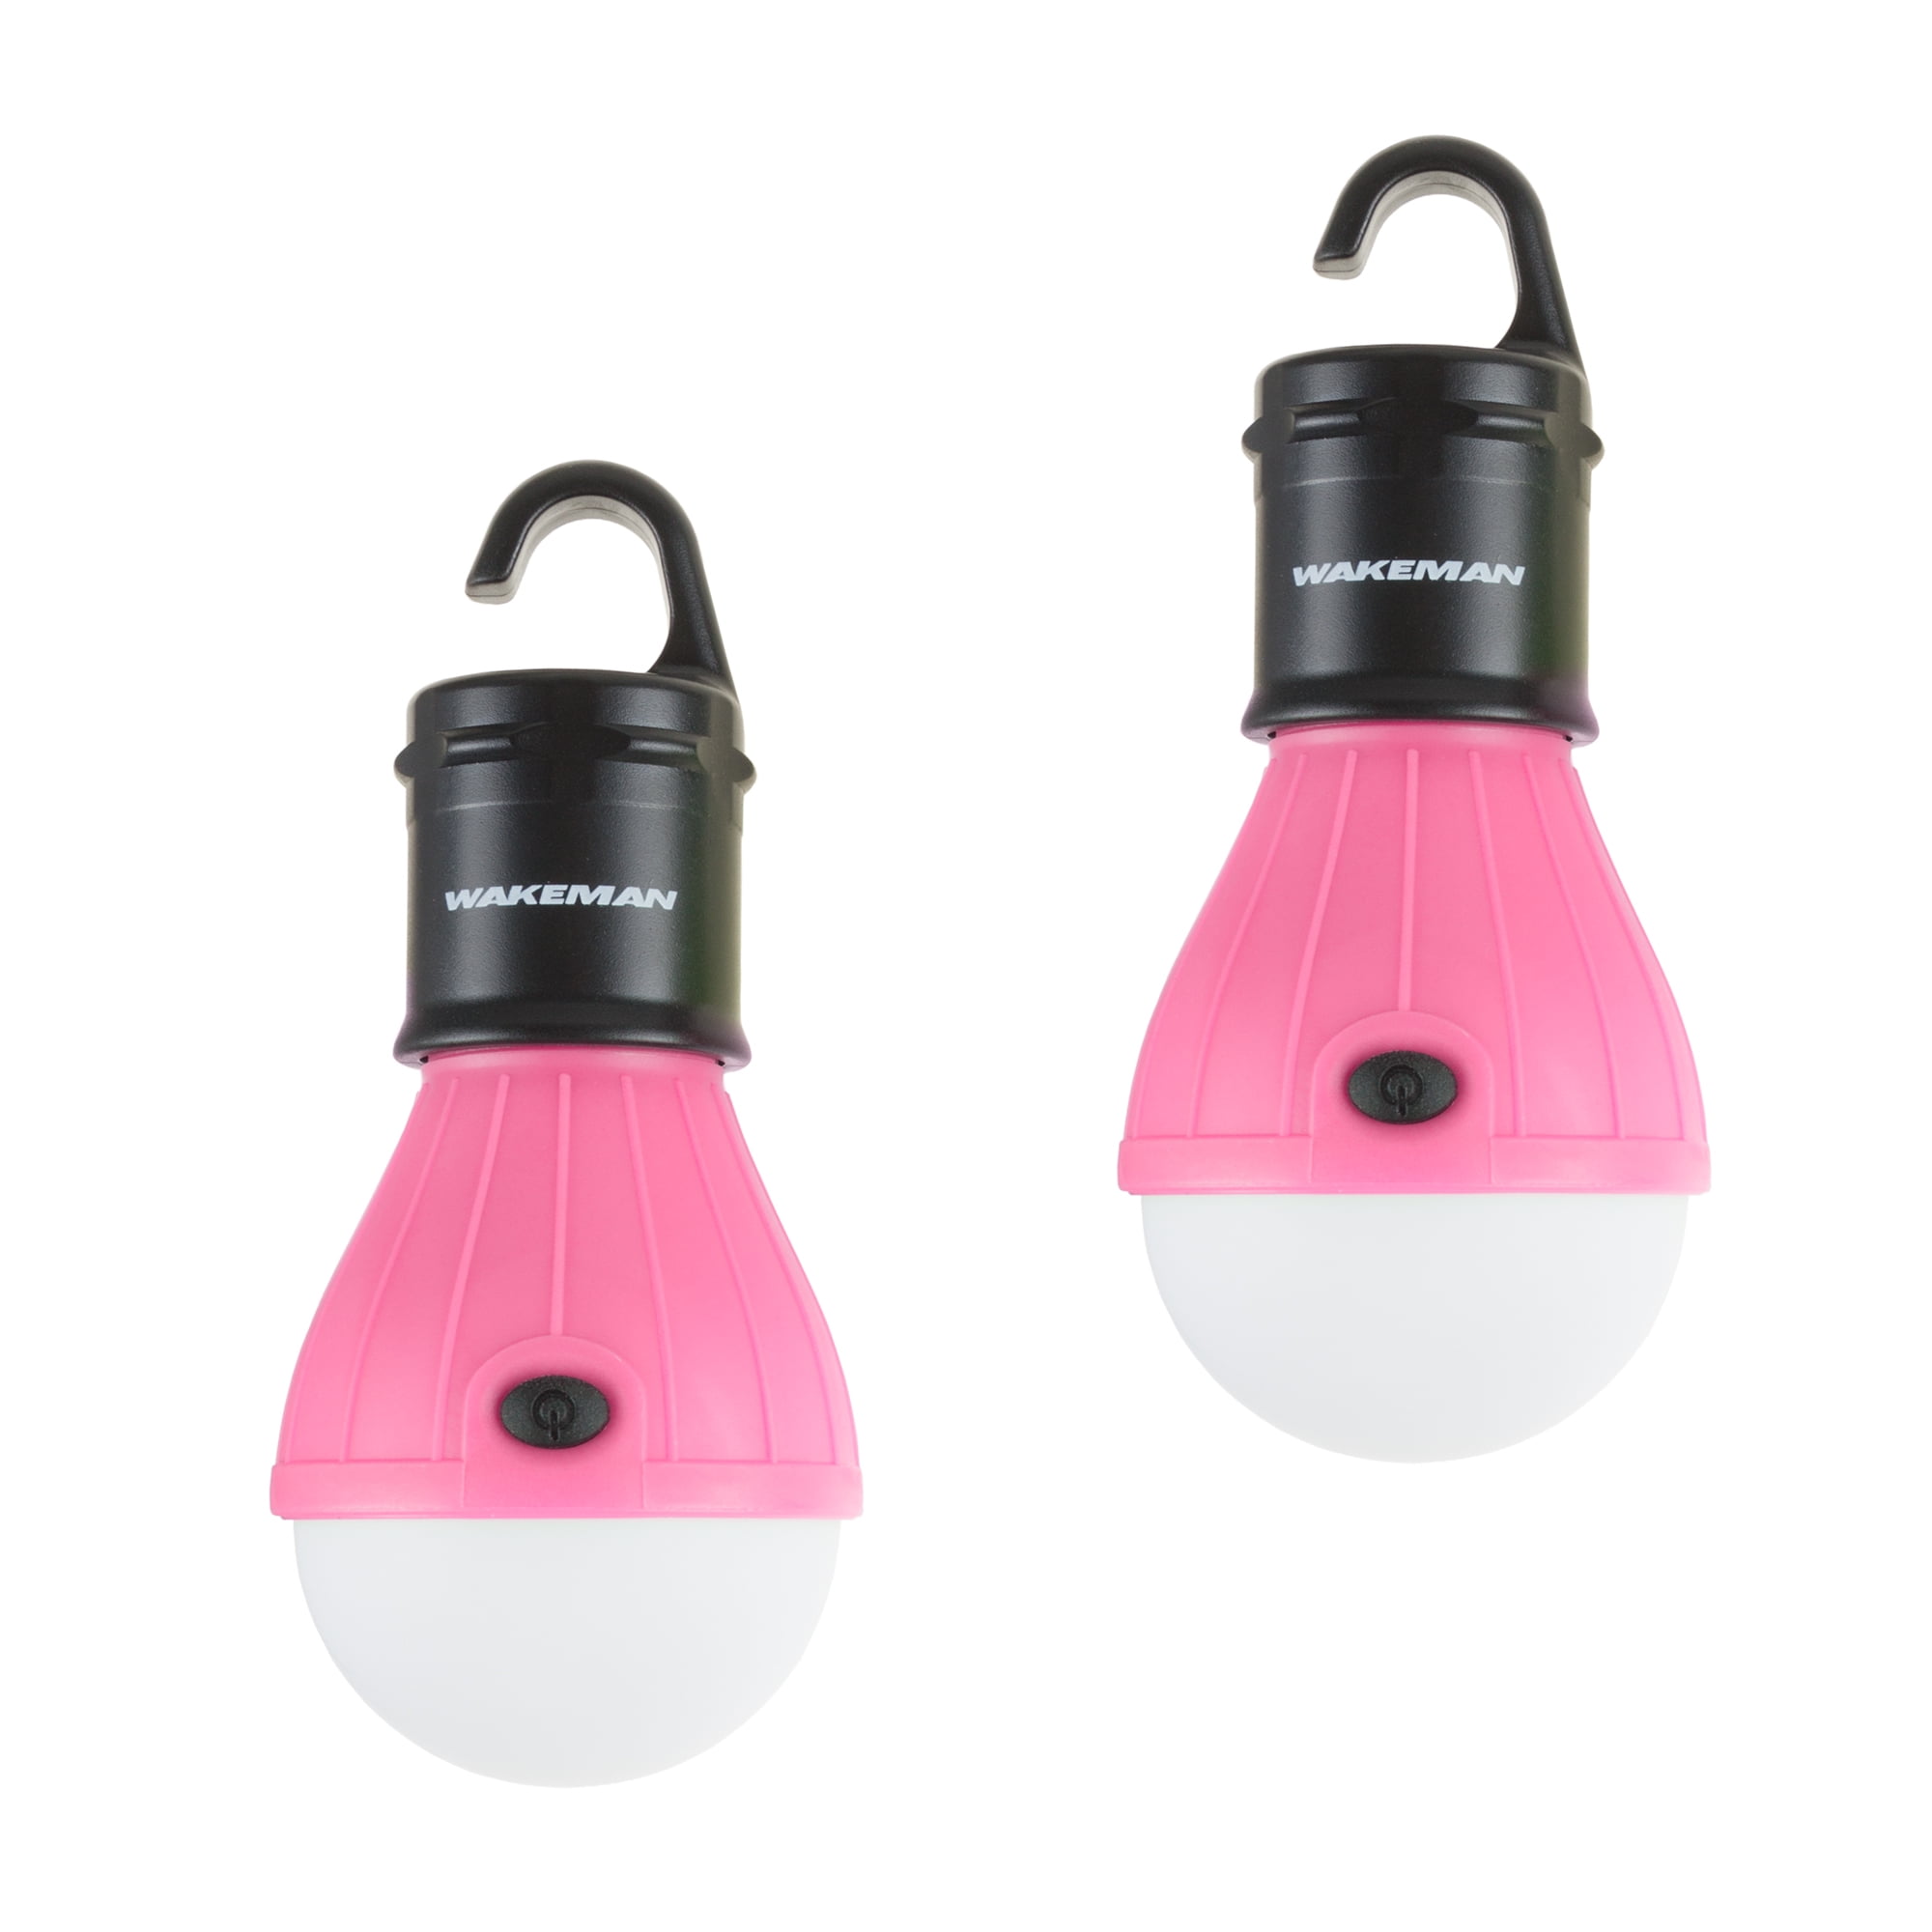 Portable LED Tent Light Bulb- 2 Pack Hanging Lights with 3 Settings and 60  Lumen By Wakeman Outdoors (Pink) (For Camping Hiking Tents and Emergency)